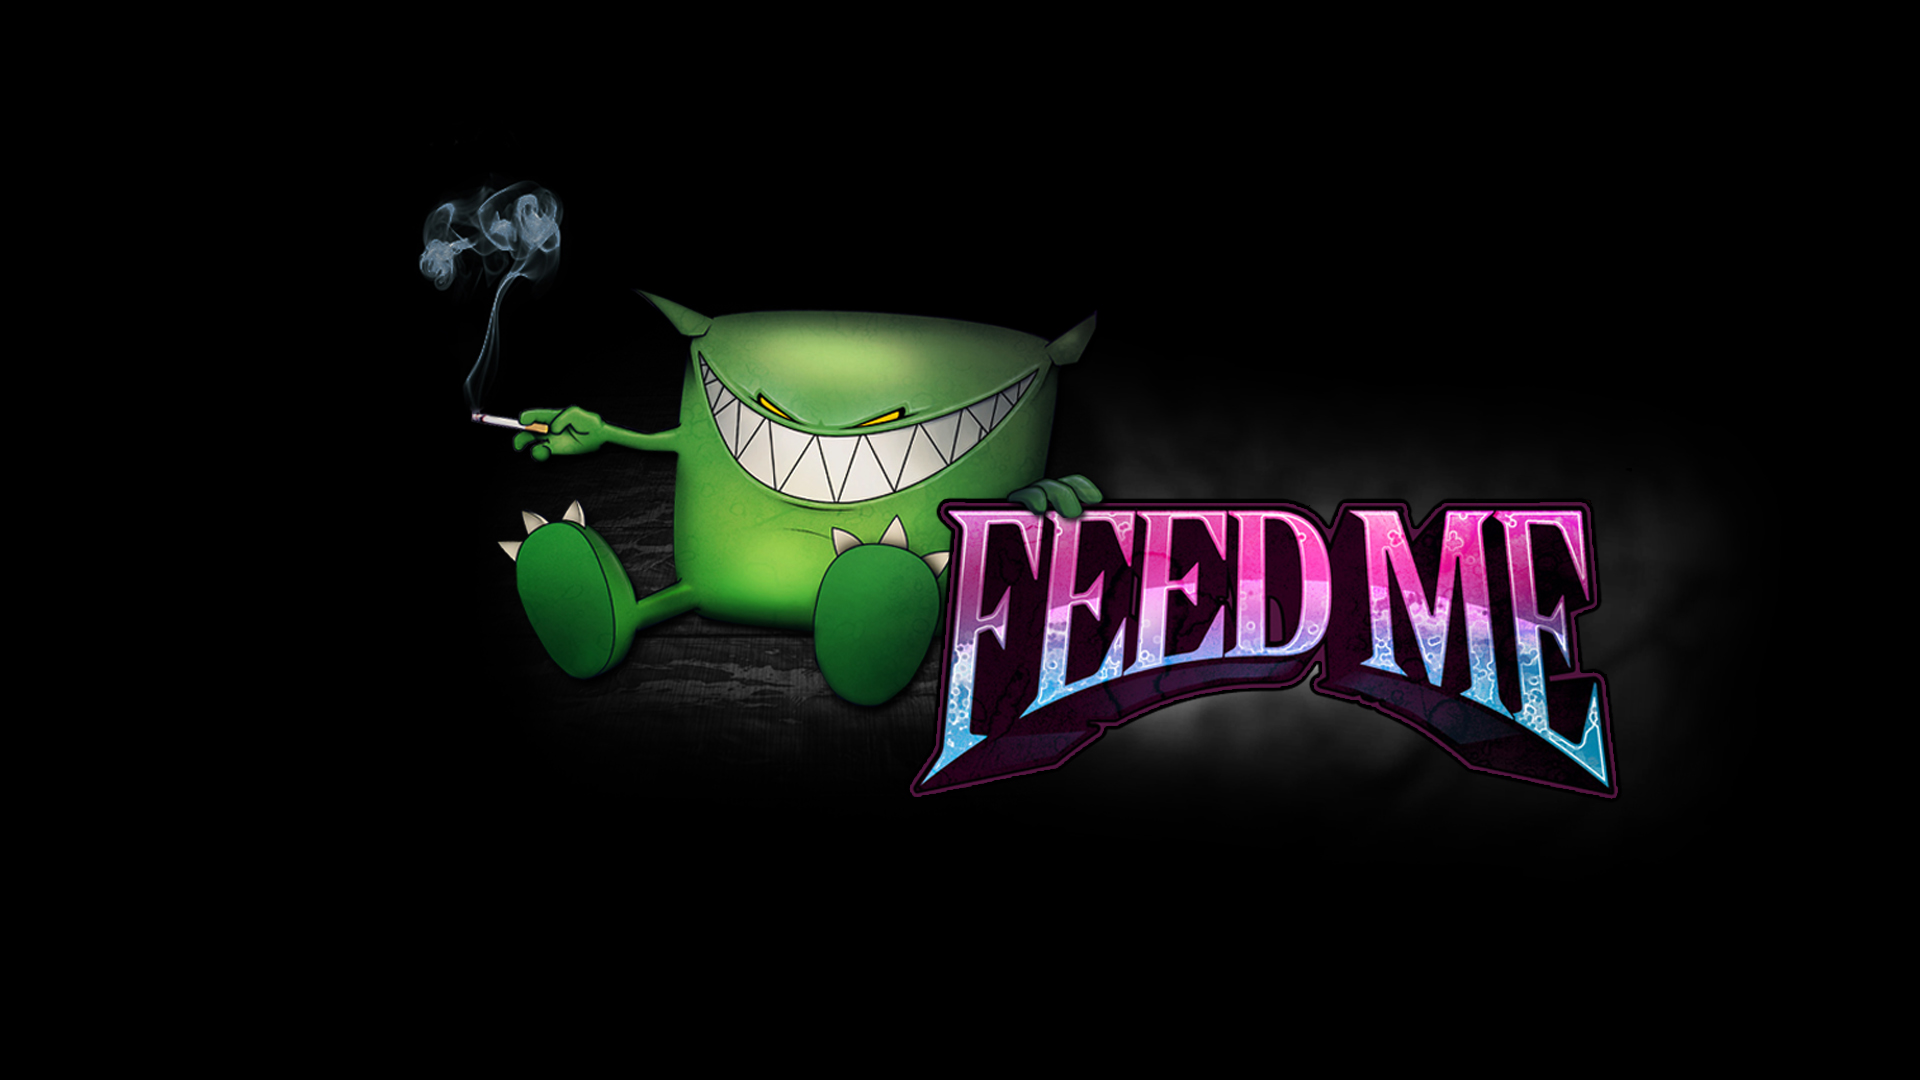 Feed Me Backgrounds, Compatible - PC, Mobile, Gadgets| 1920x1080 px